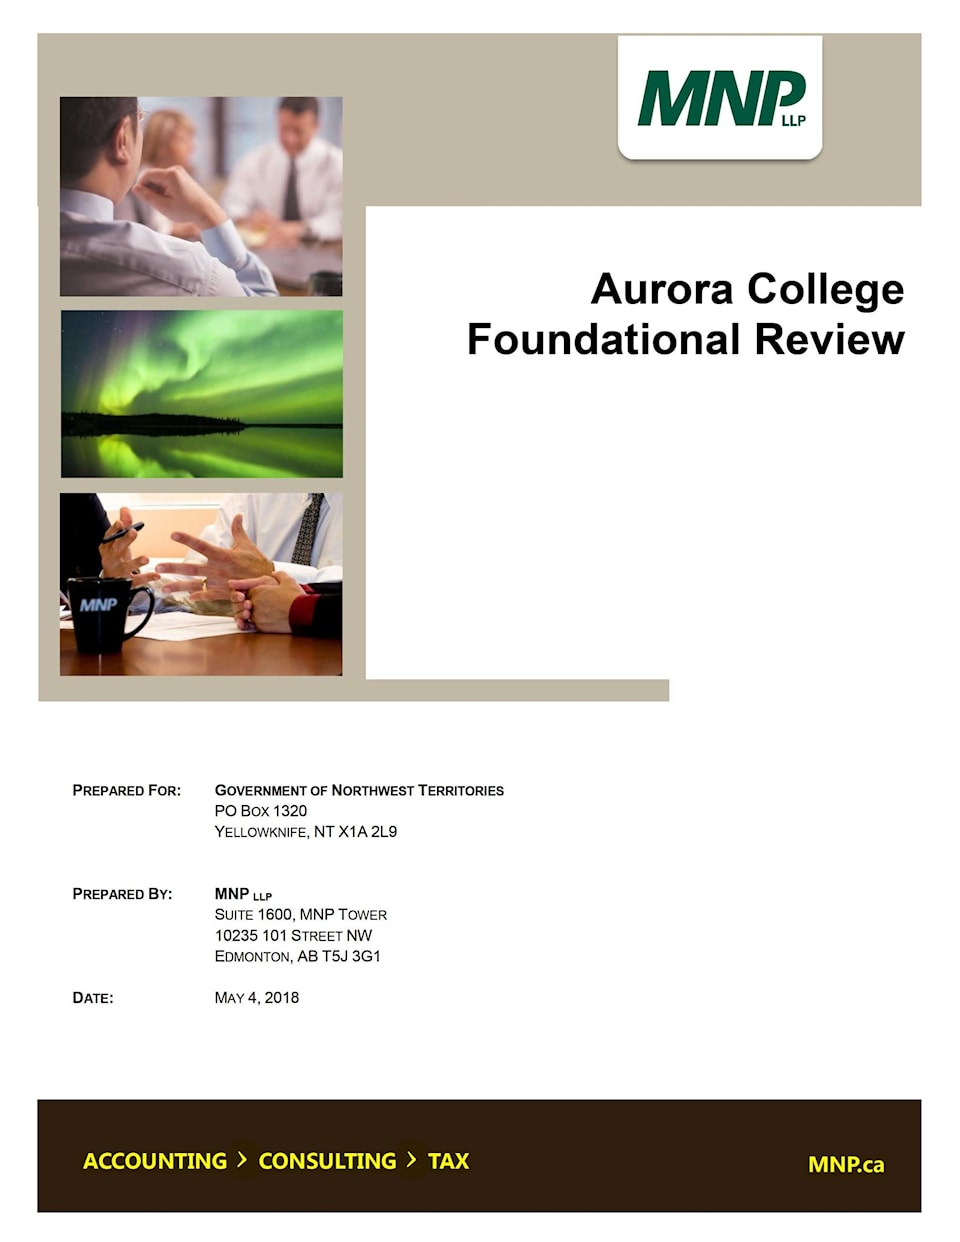 aurora_college_foundational_review_report_Sept25_2020_finished